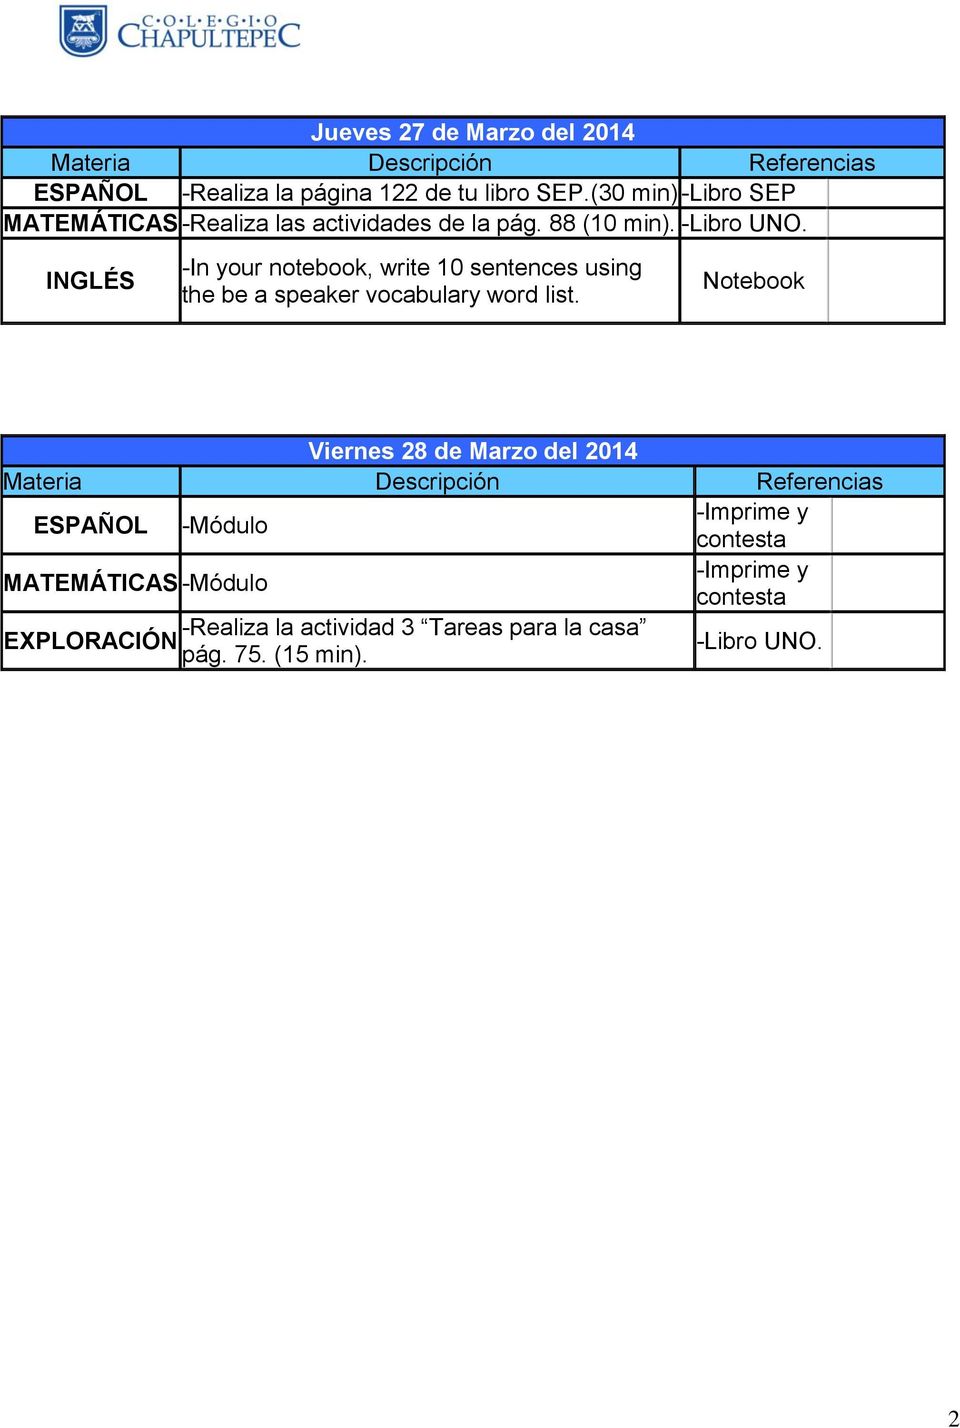 INGLÉS -In your notebook, write 10 sentences using the be a speaker vocabulary word list.